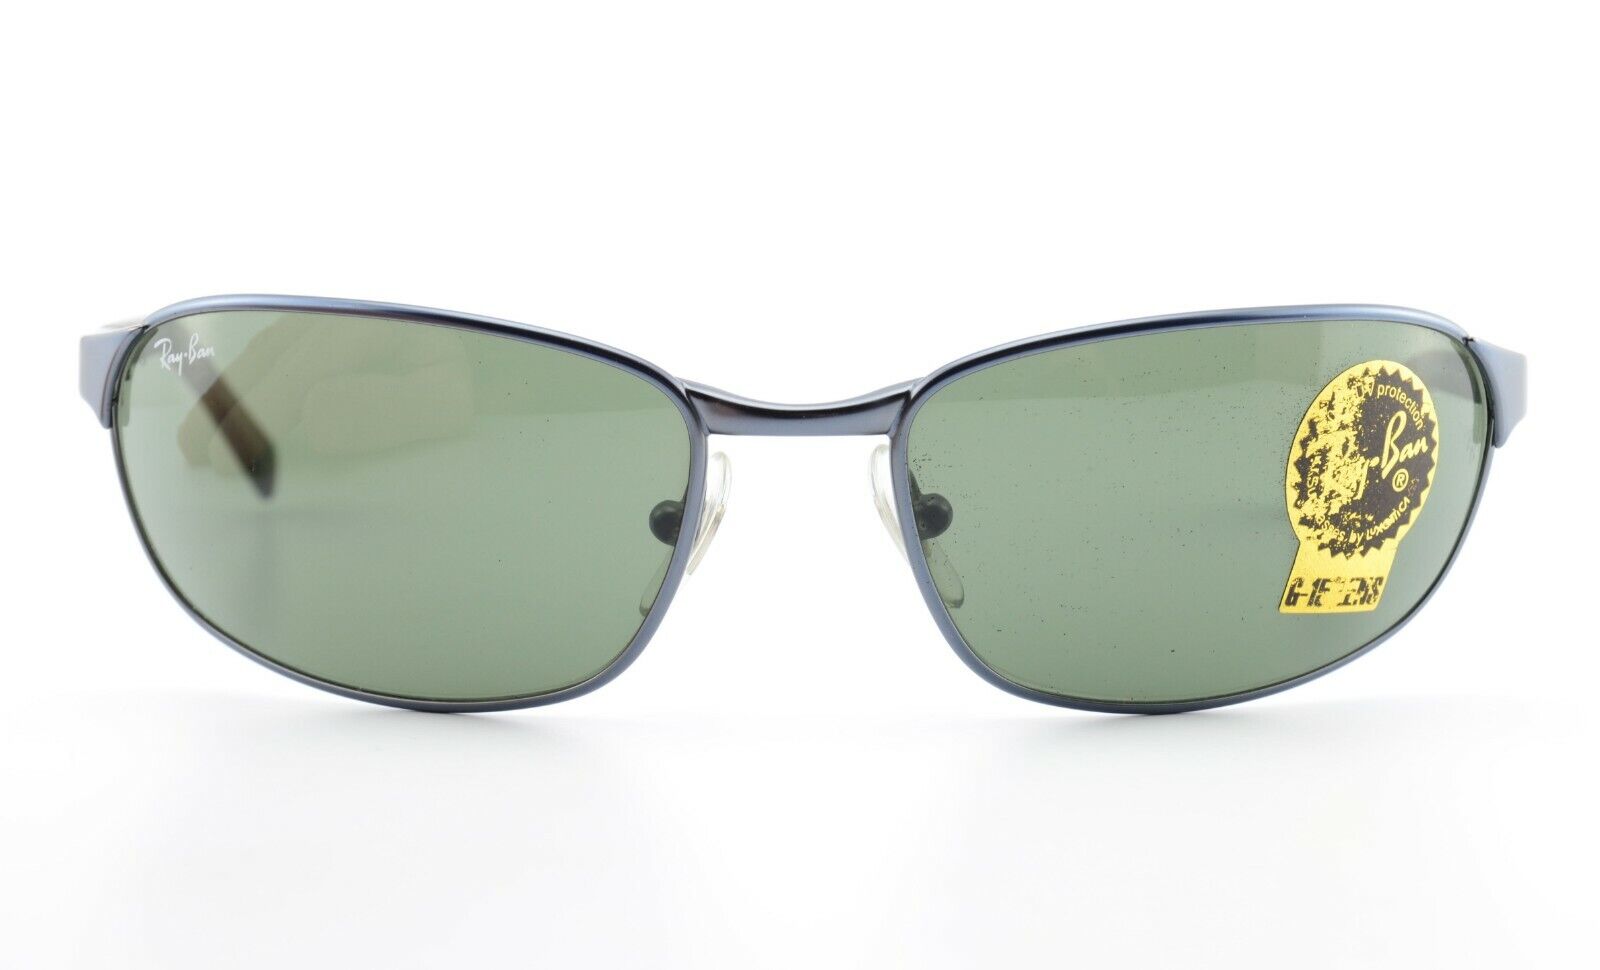 Ray-Ban Sunglasses RB 3146 Ps Sports Ms 004 196 11/12-59 1 